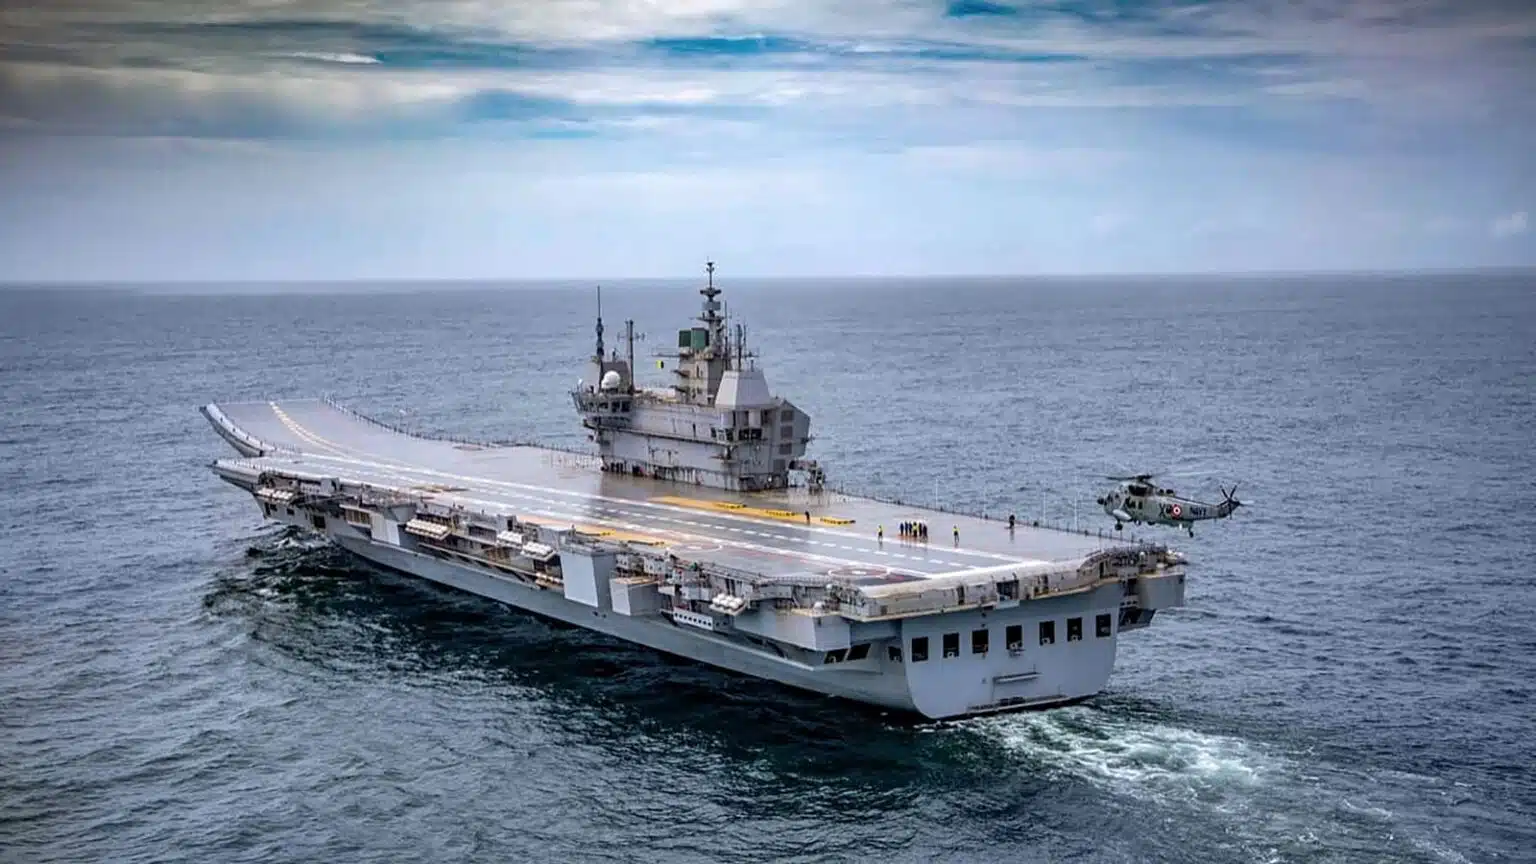 Air craft carrier INS Vikrant. The building of INS Vikrant using indigenous technology is a show of India's scientific and maritime strength.